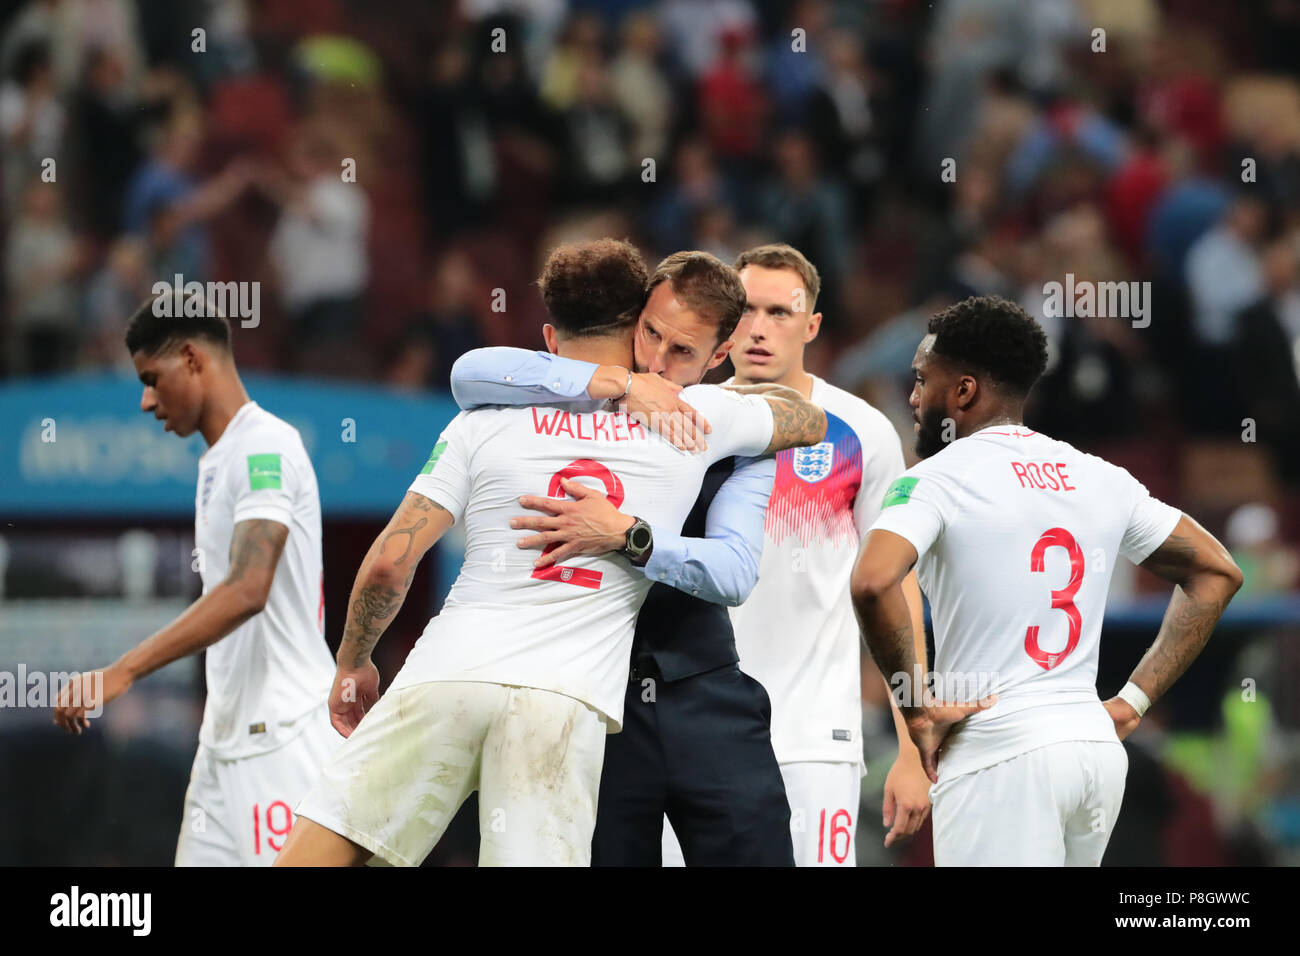 MOSCOW, RUSSIA - JULY 11: (L to R) Marcus Rashford, Kyle Walker, Gareth Southgate, Phil Jones and Danny Rose of England after the 2018 FIFA World Cup Russia Semi Final match between England and Croatia at Luzhniki Stadium on July 11, 2018 in Moscow, Russia. MB Media Stock Photo